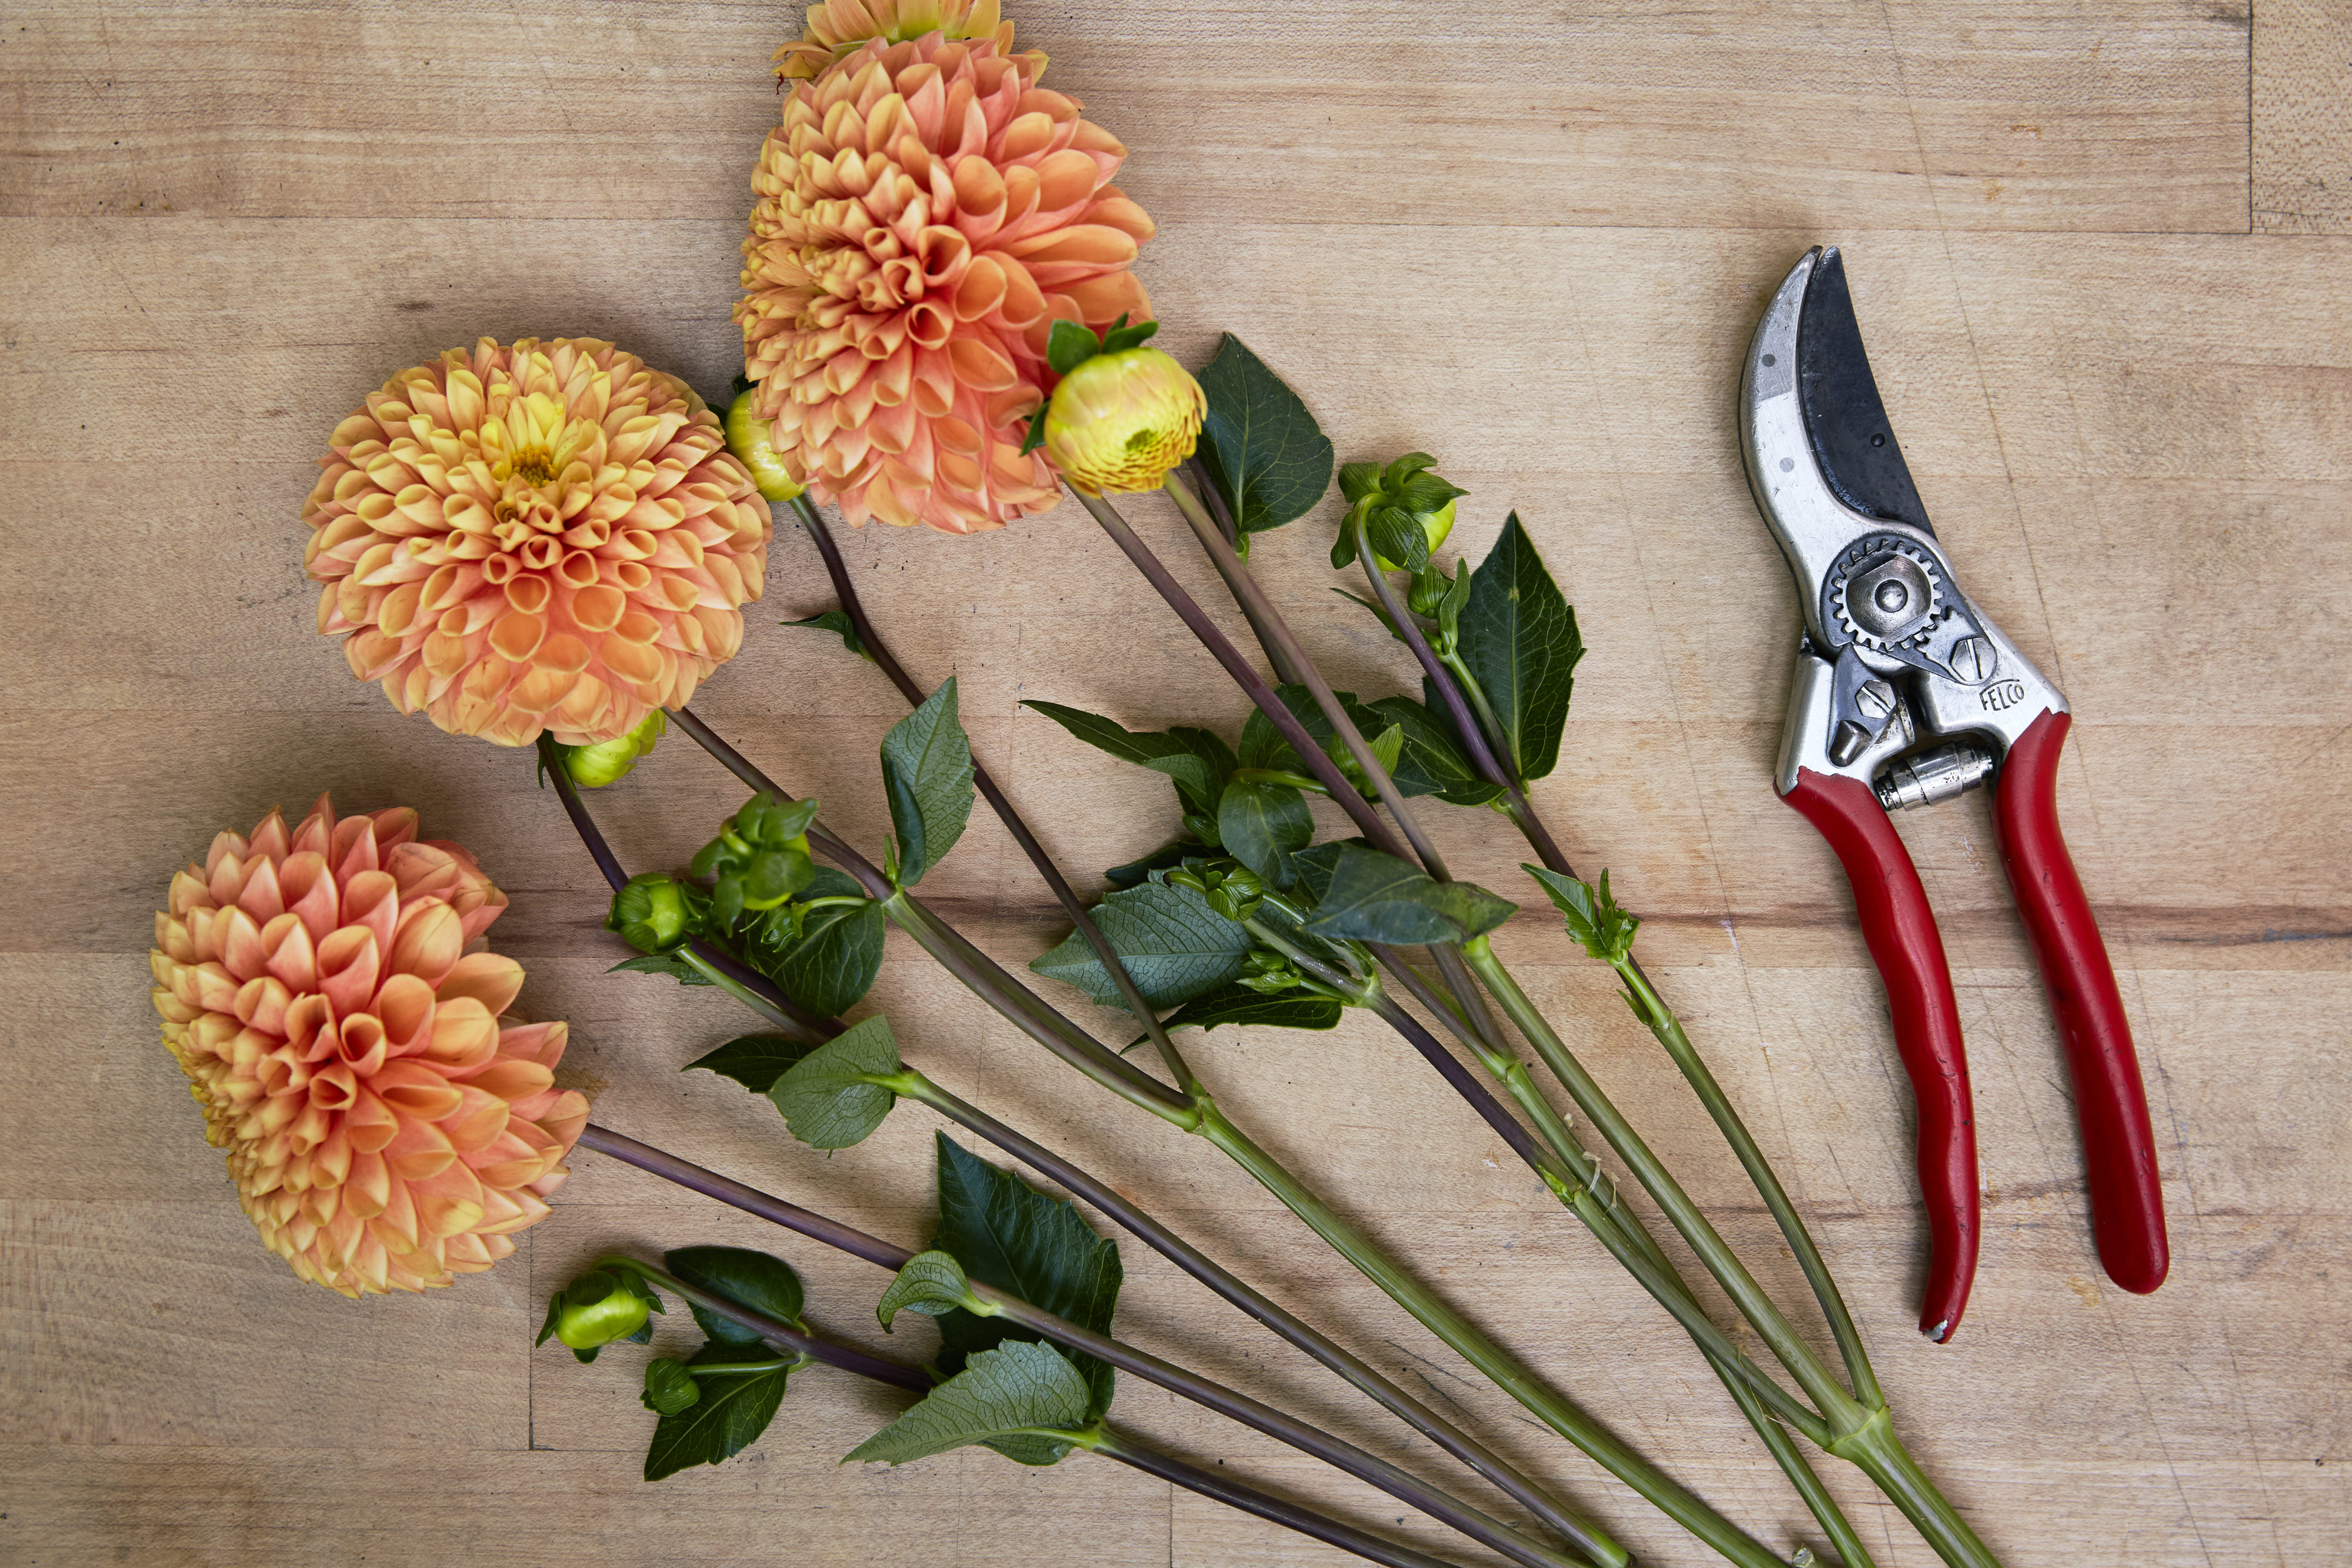 How to Clean Garden Pruners and Keep Them in Tip-Top Shape